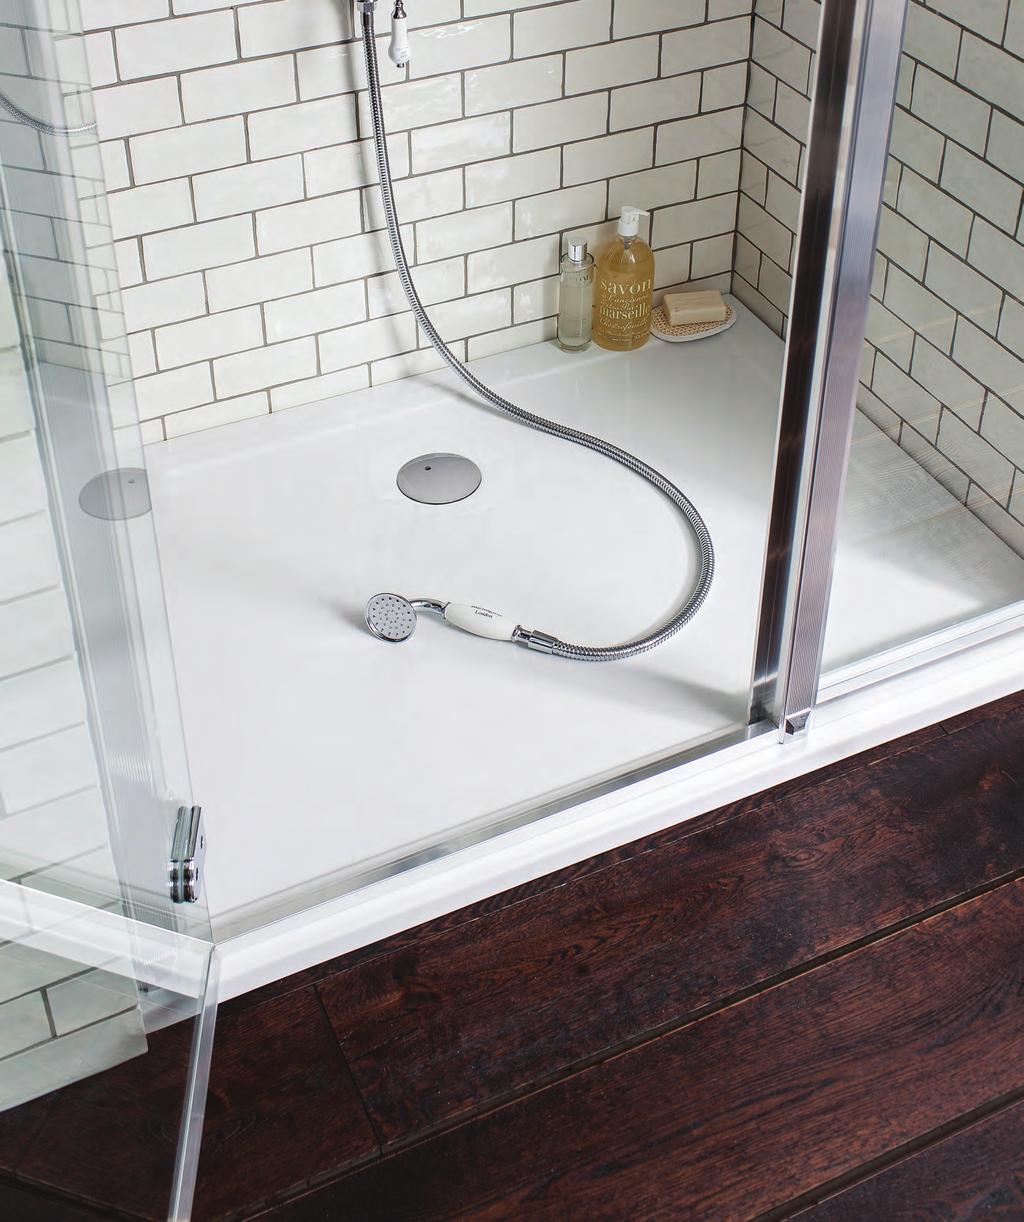 TRAYS SHOWERING The Zamori 35mm high shower tray range is the most extensive available. With over 60 models to chose from, you are guaranteed to find one to fit the space available in your bathroom.